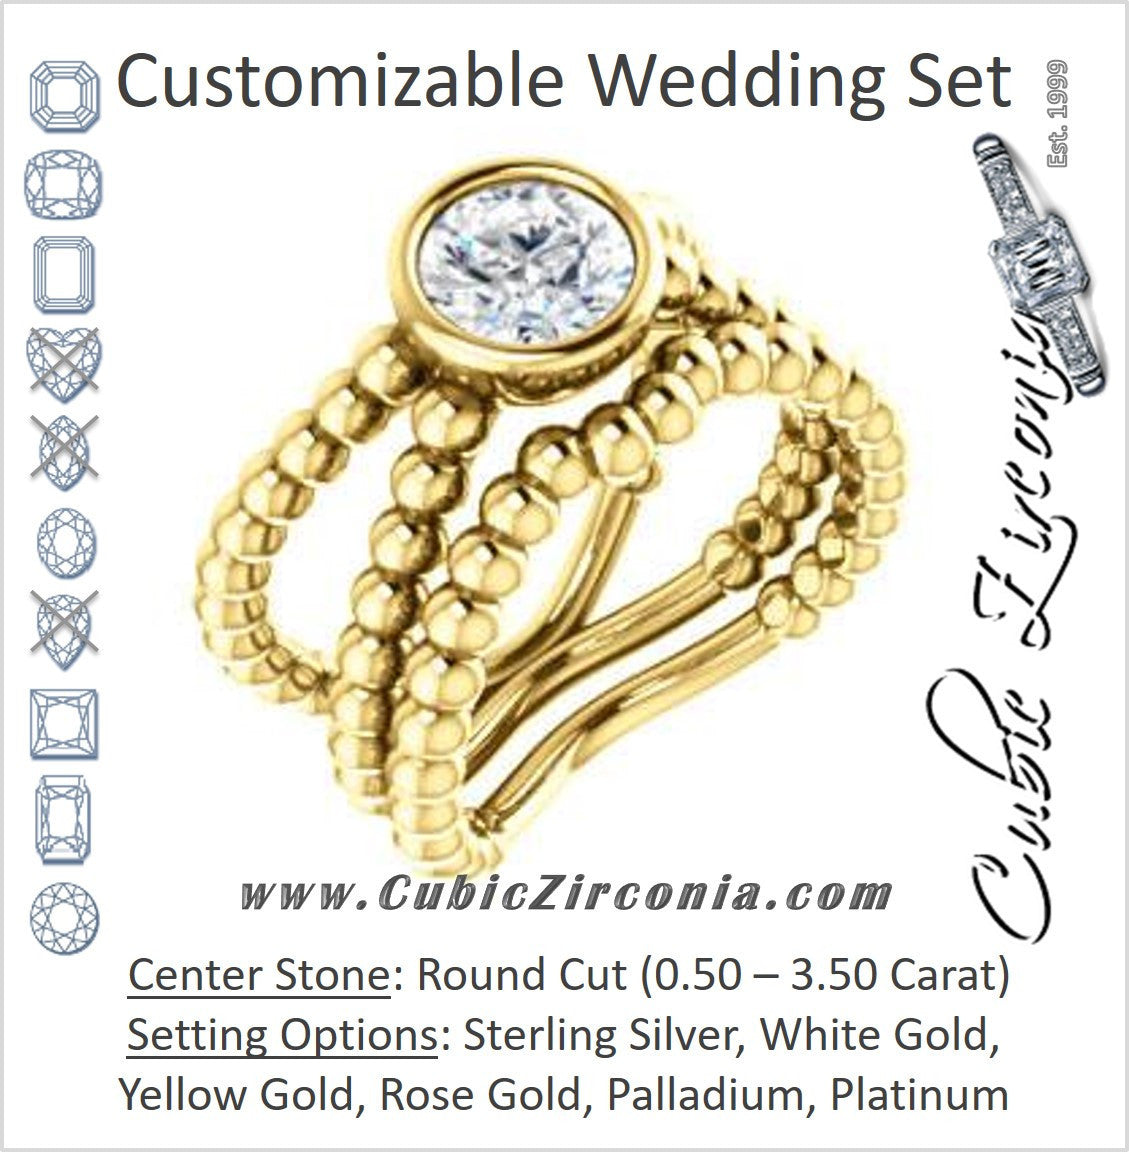 CZ Wedding Set, featuring The Maria Leeslii engagement ring (Customizable Bezel-set Round Cut Solitaire with Wide Beaded-Metal Split-Band)